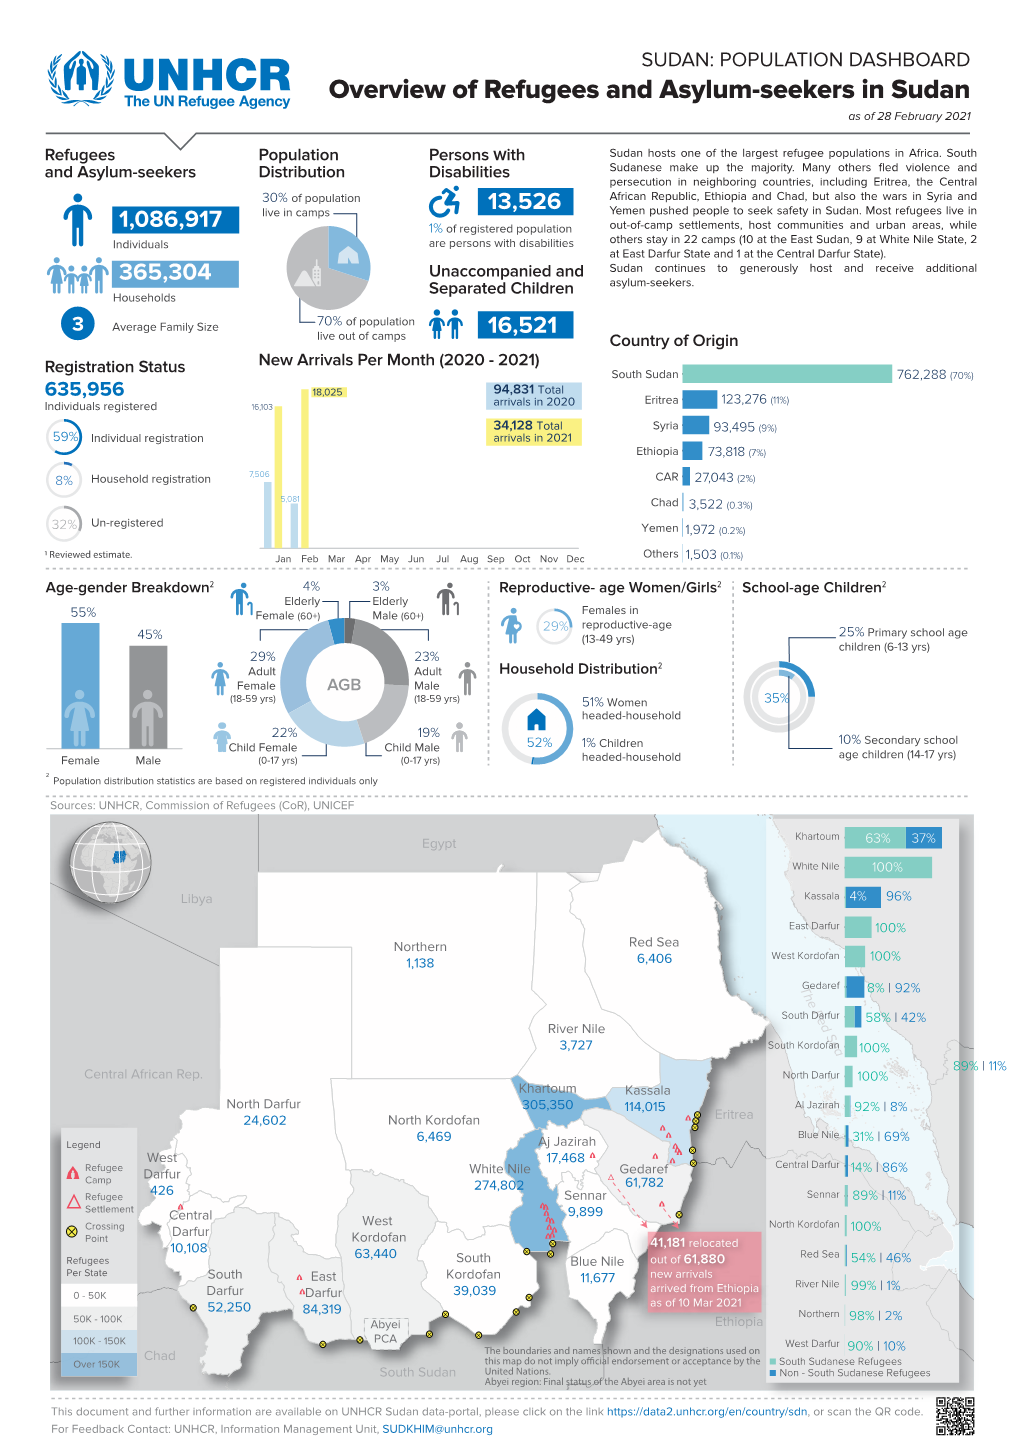 Overview of Refugees and Asylum-Seekers in Sudan As of 28 February 2021